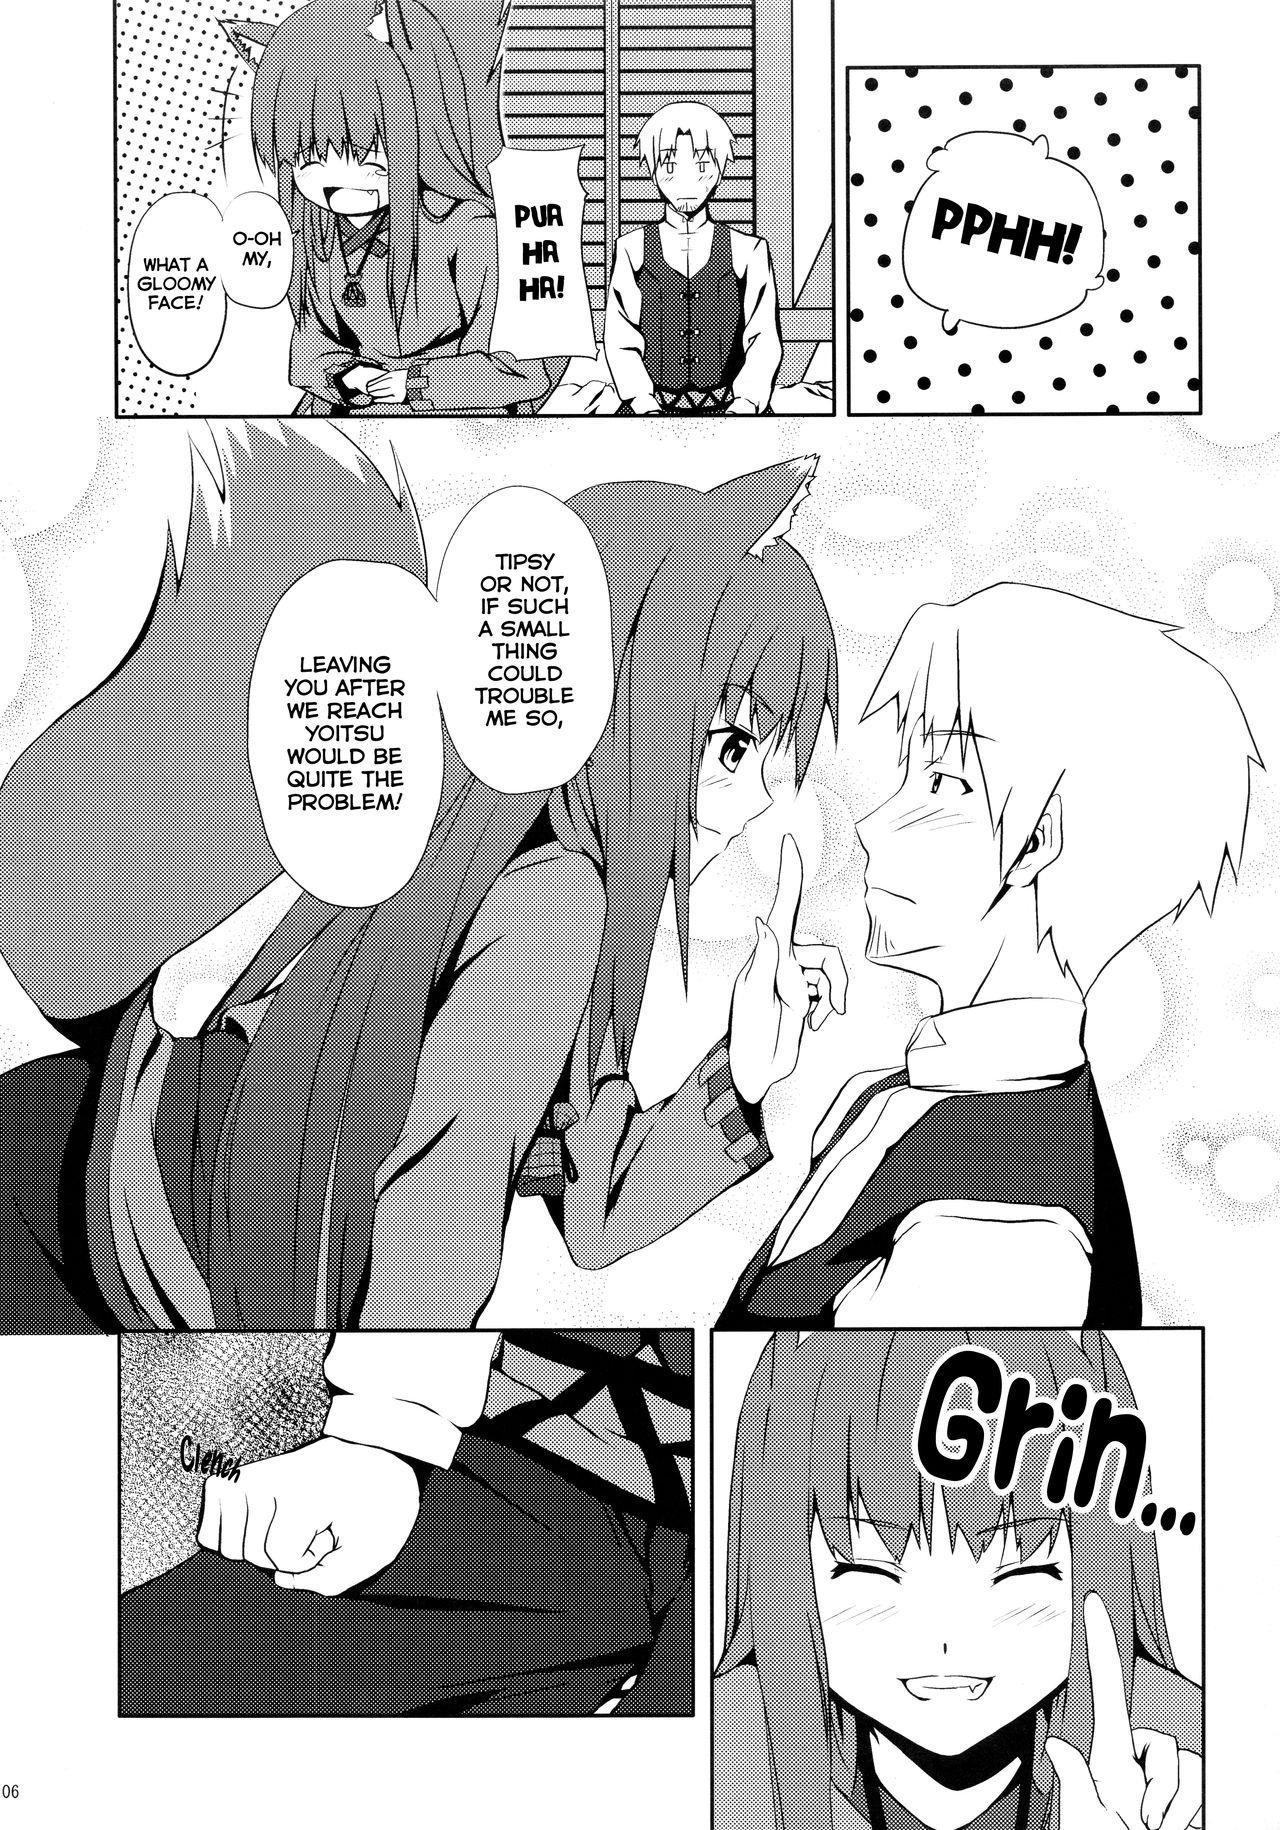 Celebrity Bitter Apple - Spice and wolf Zorra - Page 6